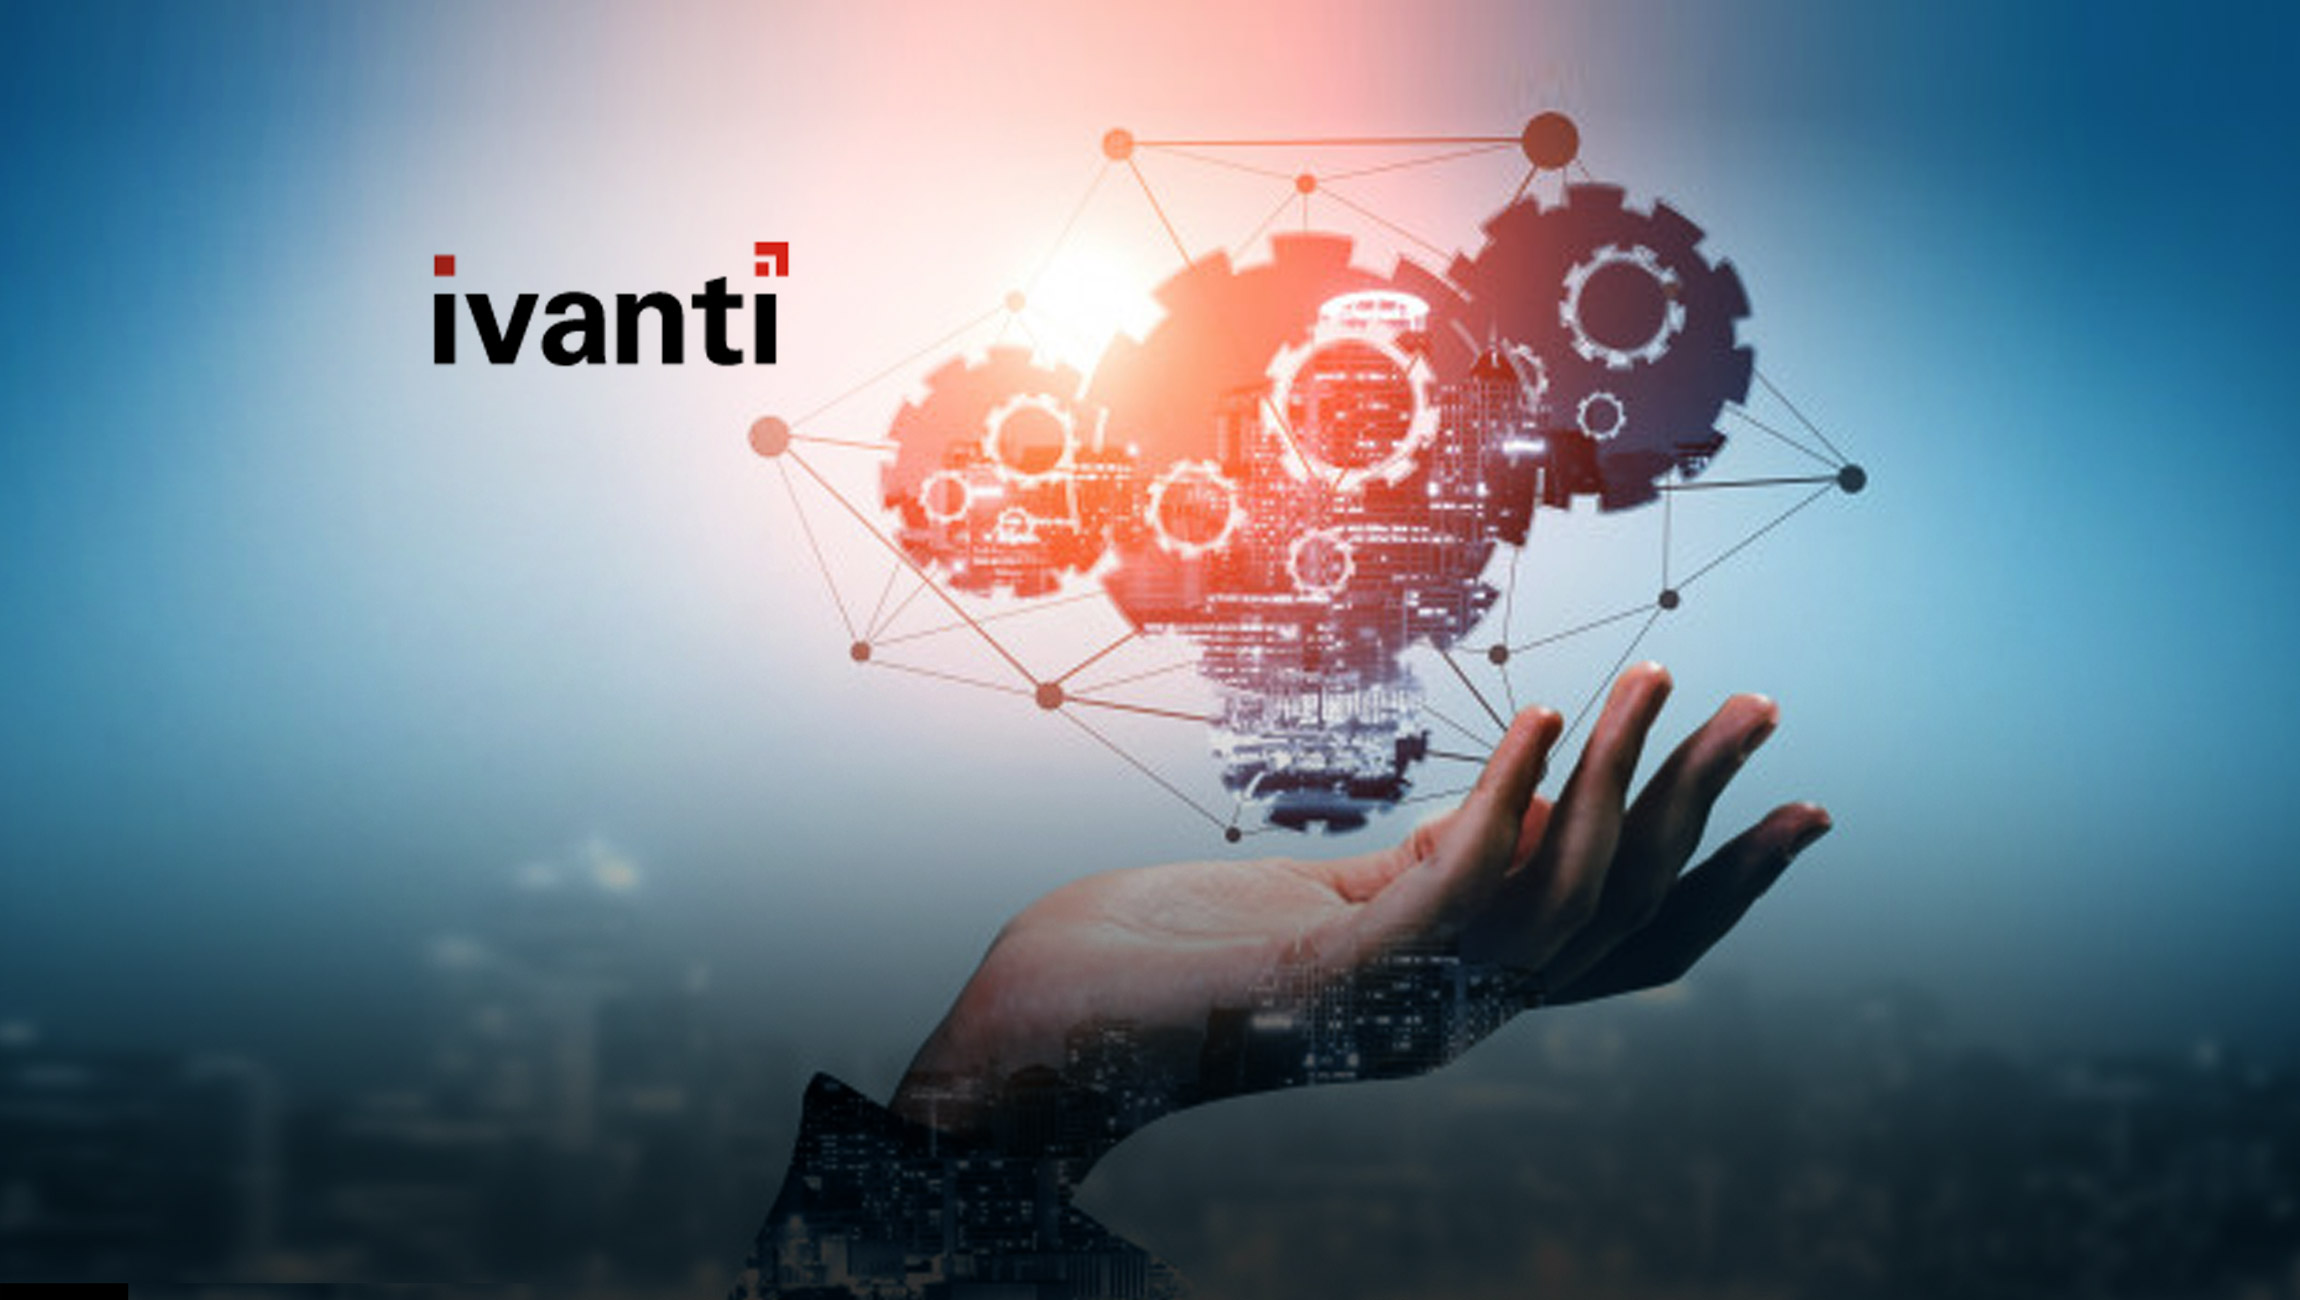 Ivanti Positioned as a Leader in the Gartner Magic Quadrant for IT Service Management Tools